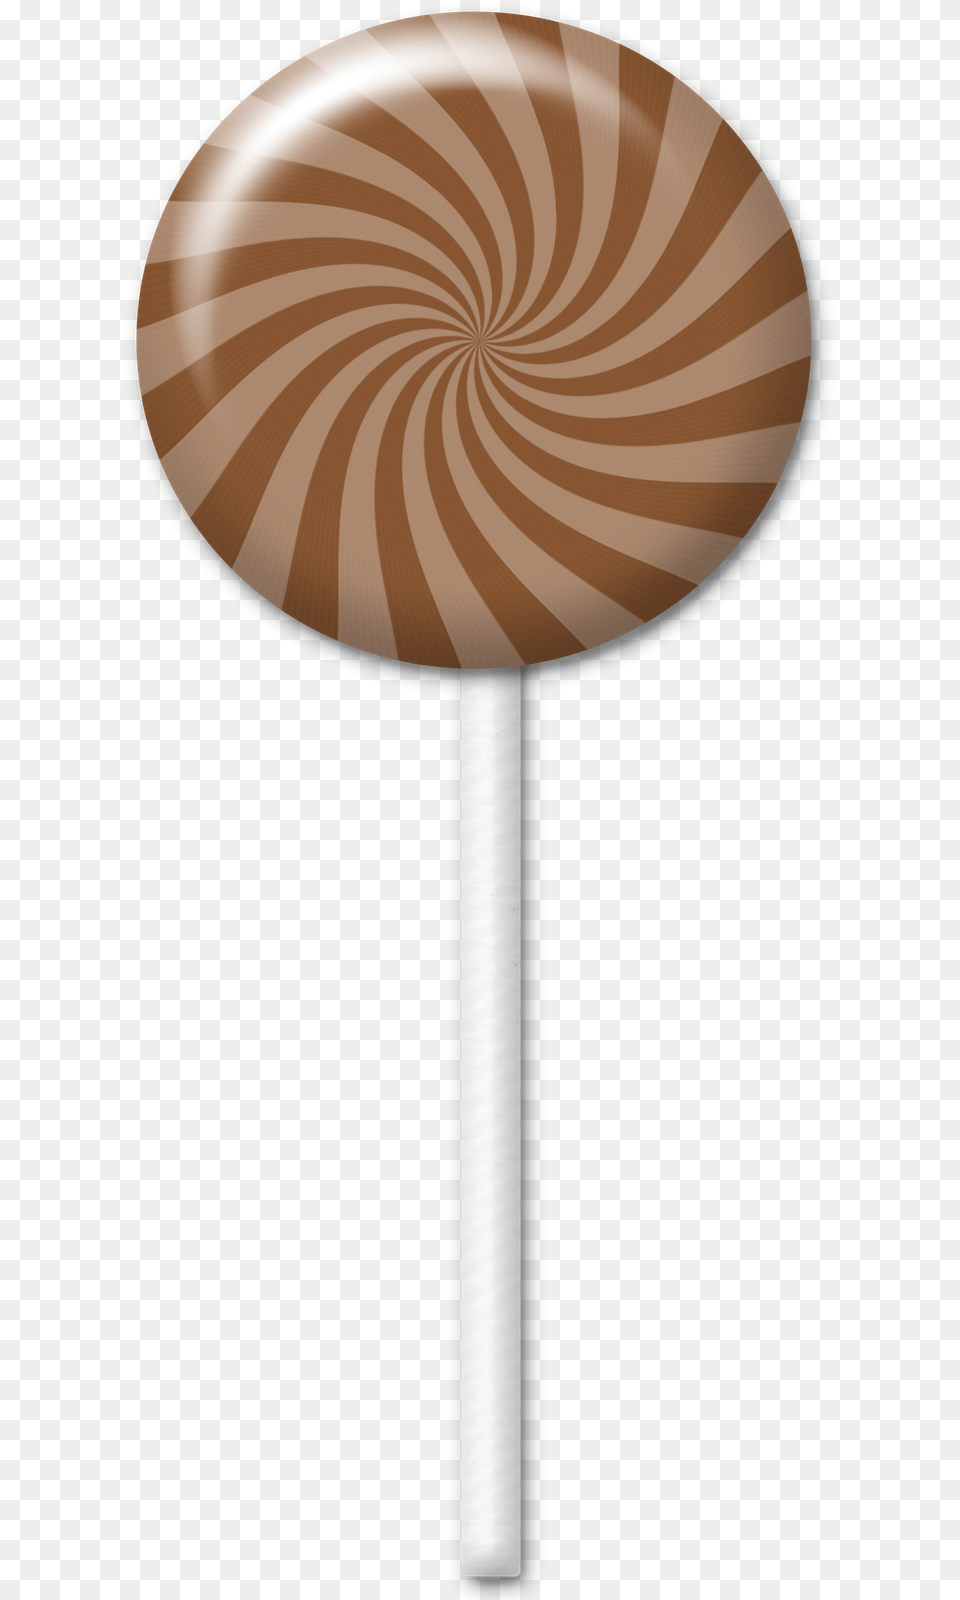 Cool Chocolates Explore Pictures For Chocolate Lollipop, Candy, Food, Sweets, Lamp Free Transparent Png